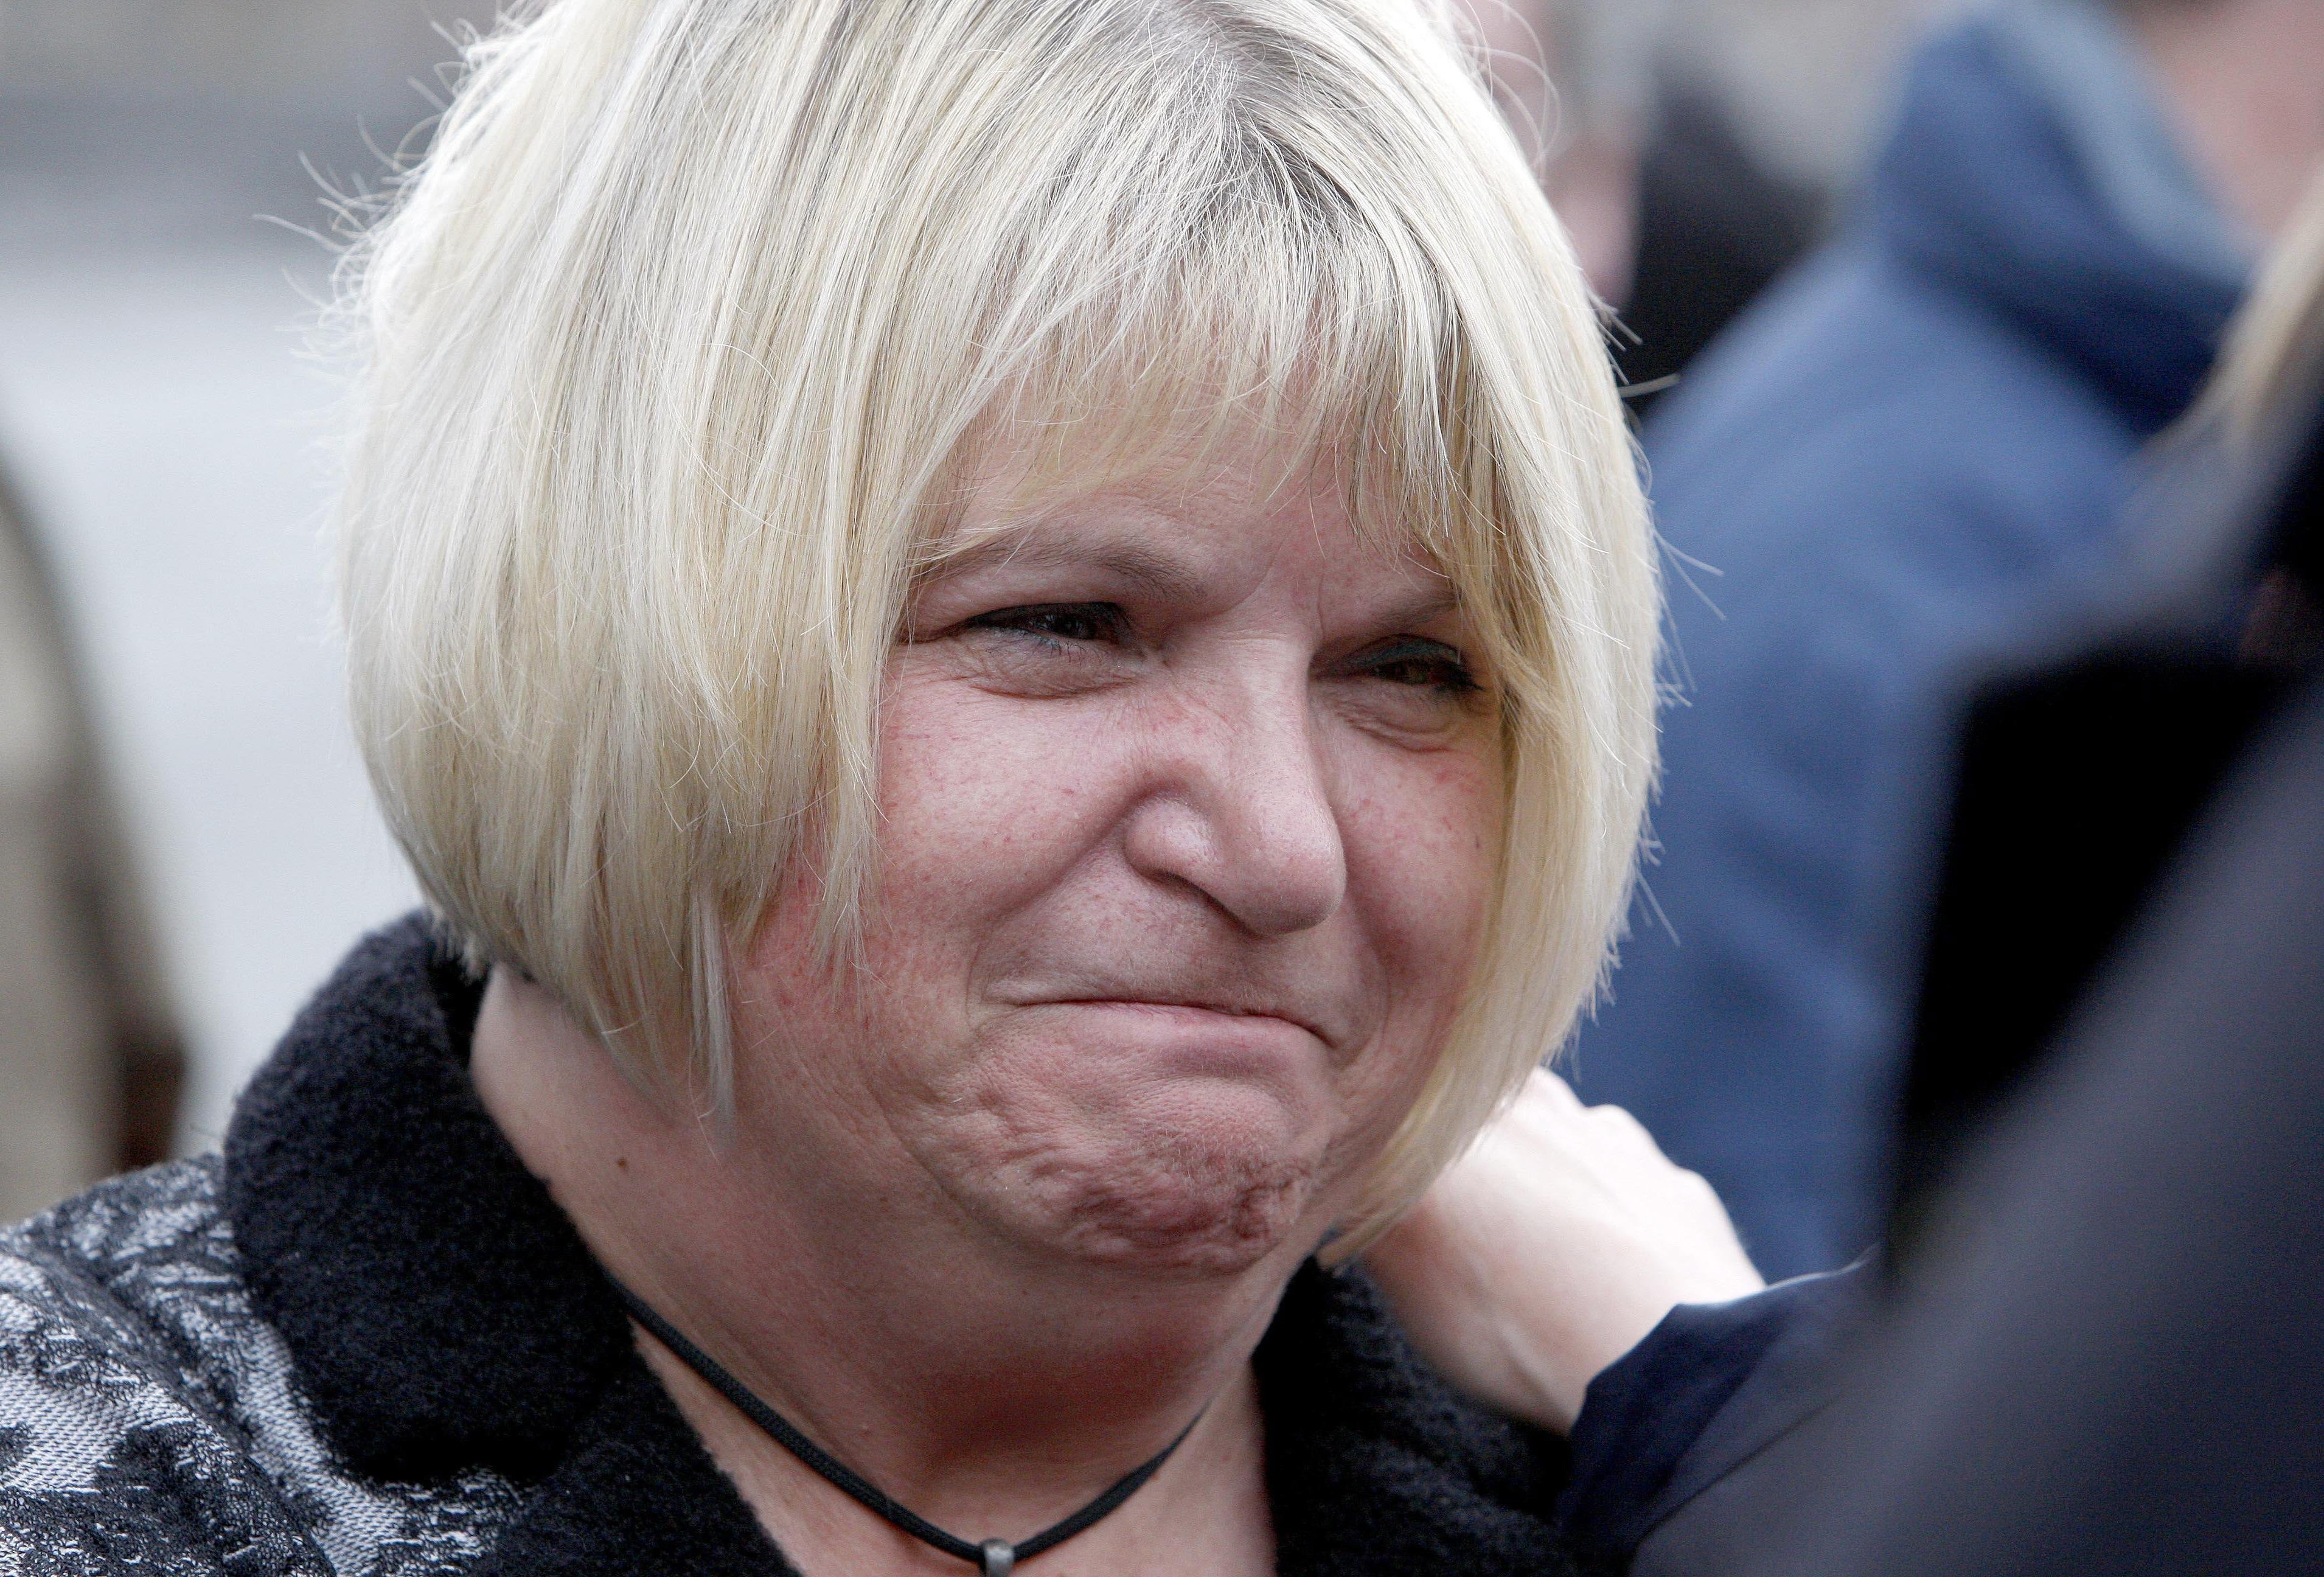 Sylvia Lancaster, mother of murdered Sophie, stands outside Preston Crown Court after the sentencing of two teenagers for the murder of her daughter in 2007. (PA)